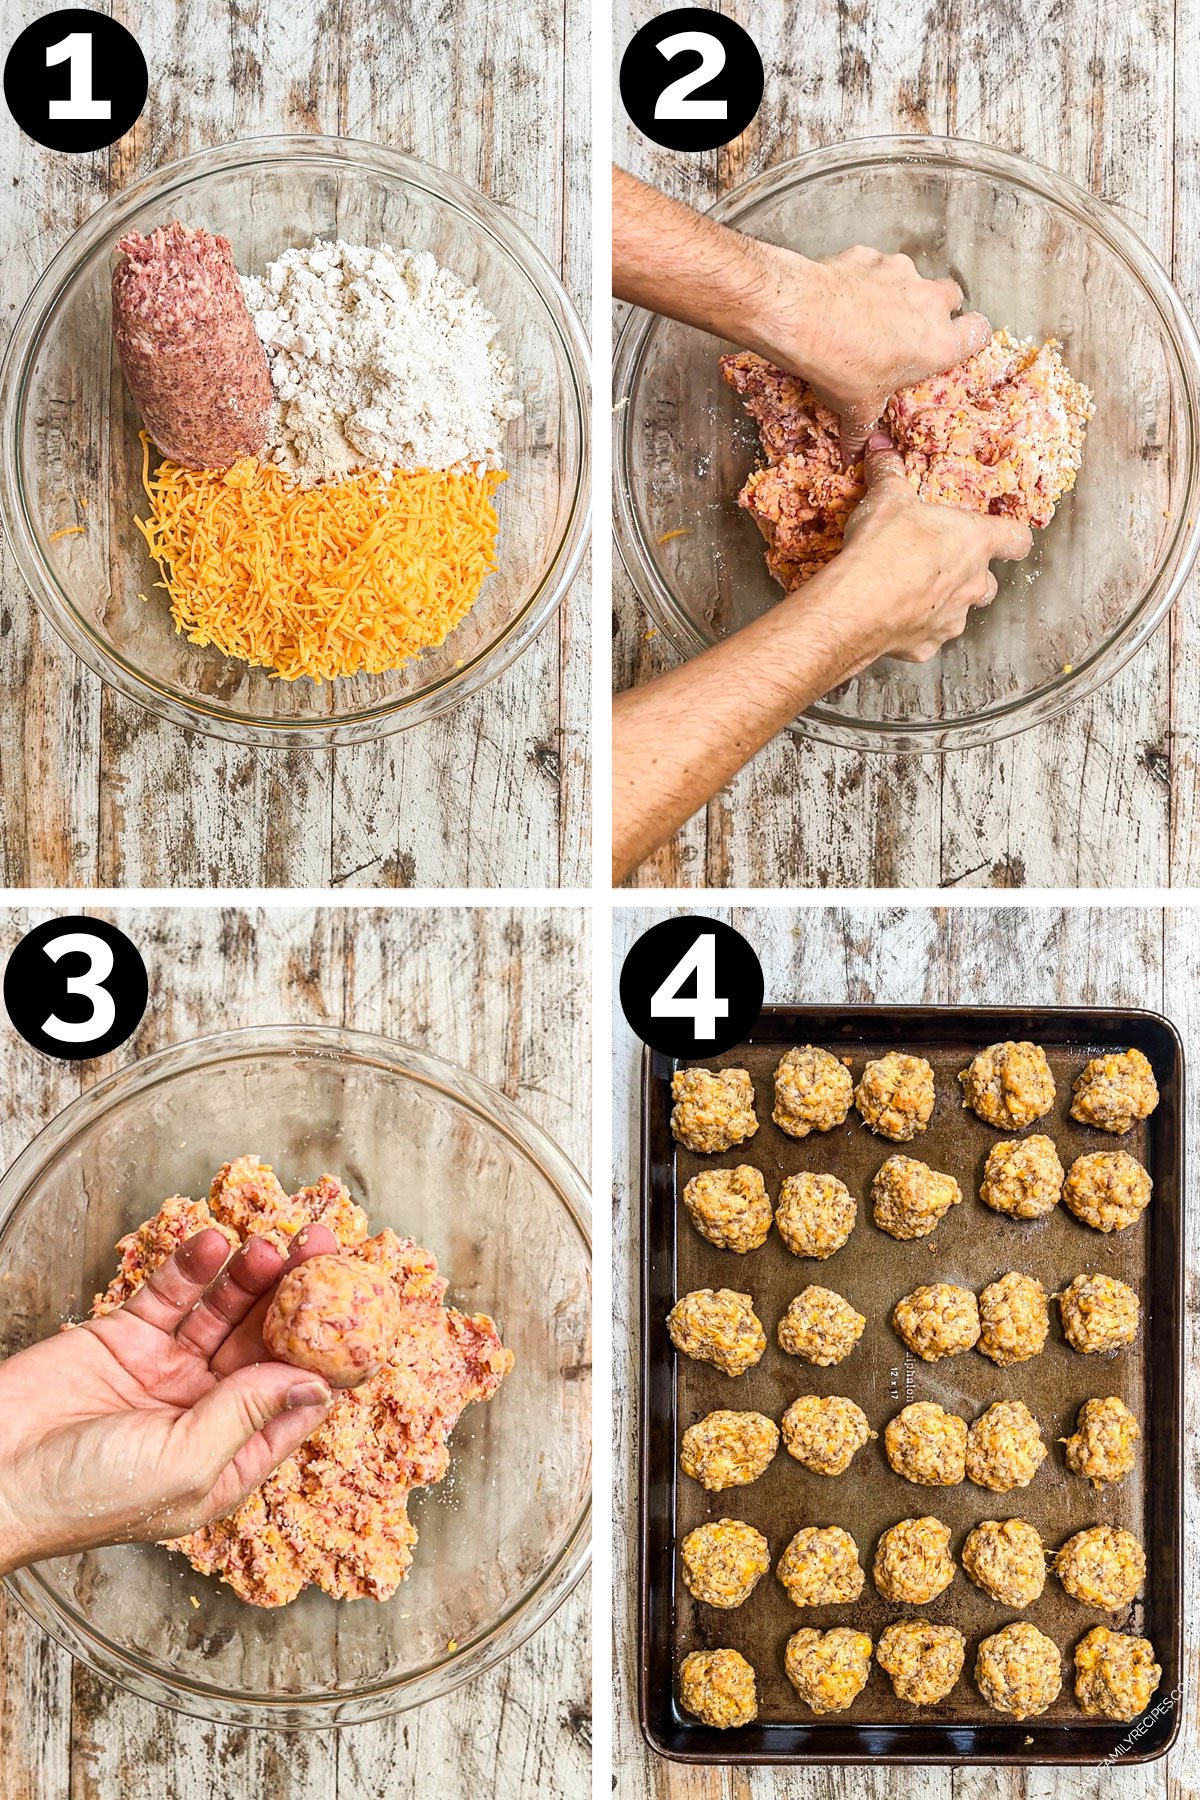 4 image collage making recipe: 1 ingredients in a bowl before mixing, 2- hands in mixture combining well, 3- rolling sausage mixture into small balls, 4- sausage balls lined on a baking sheet.